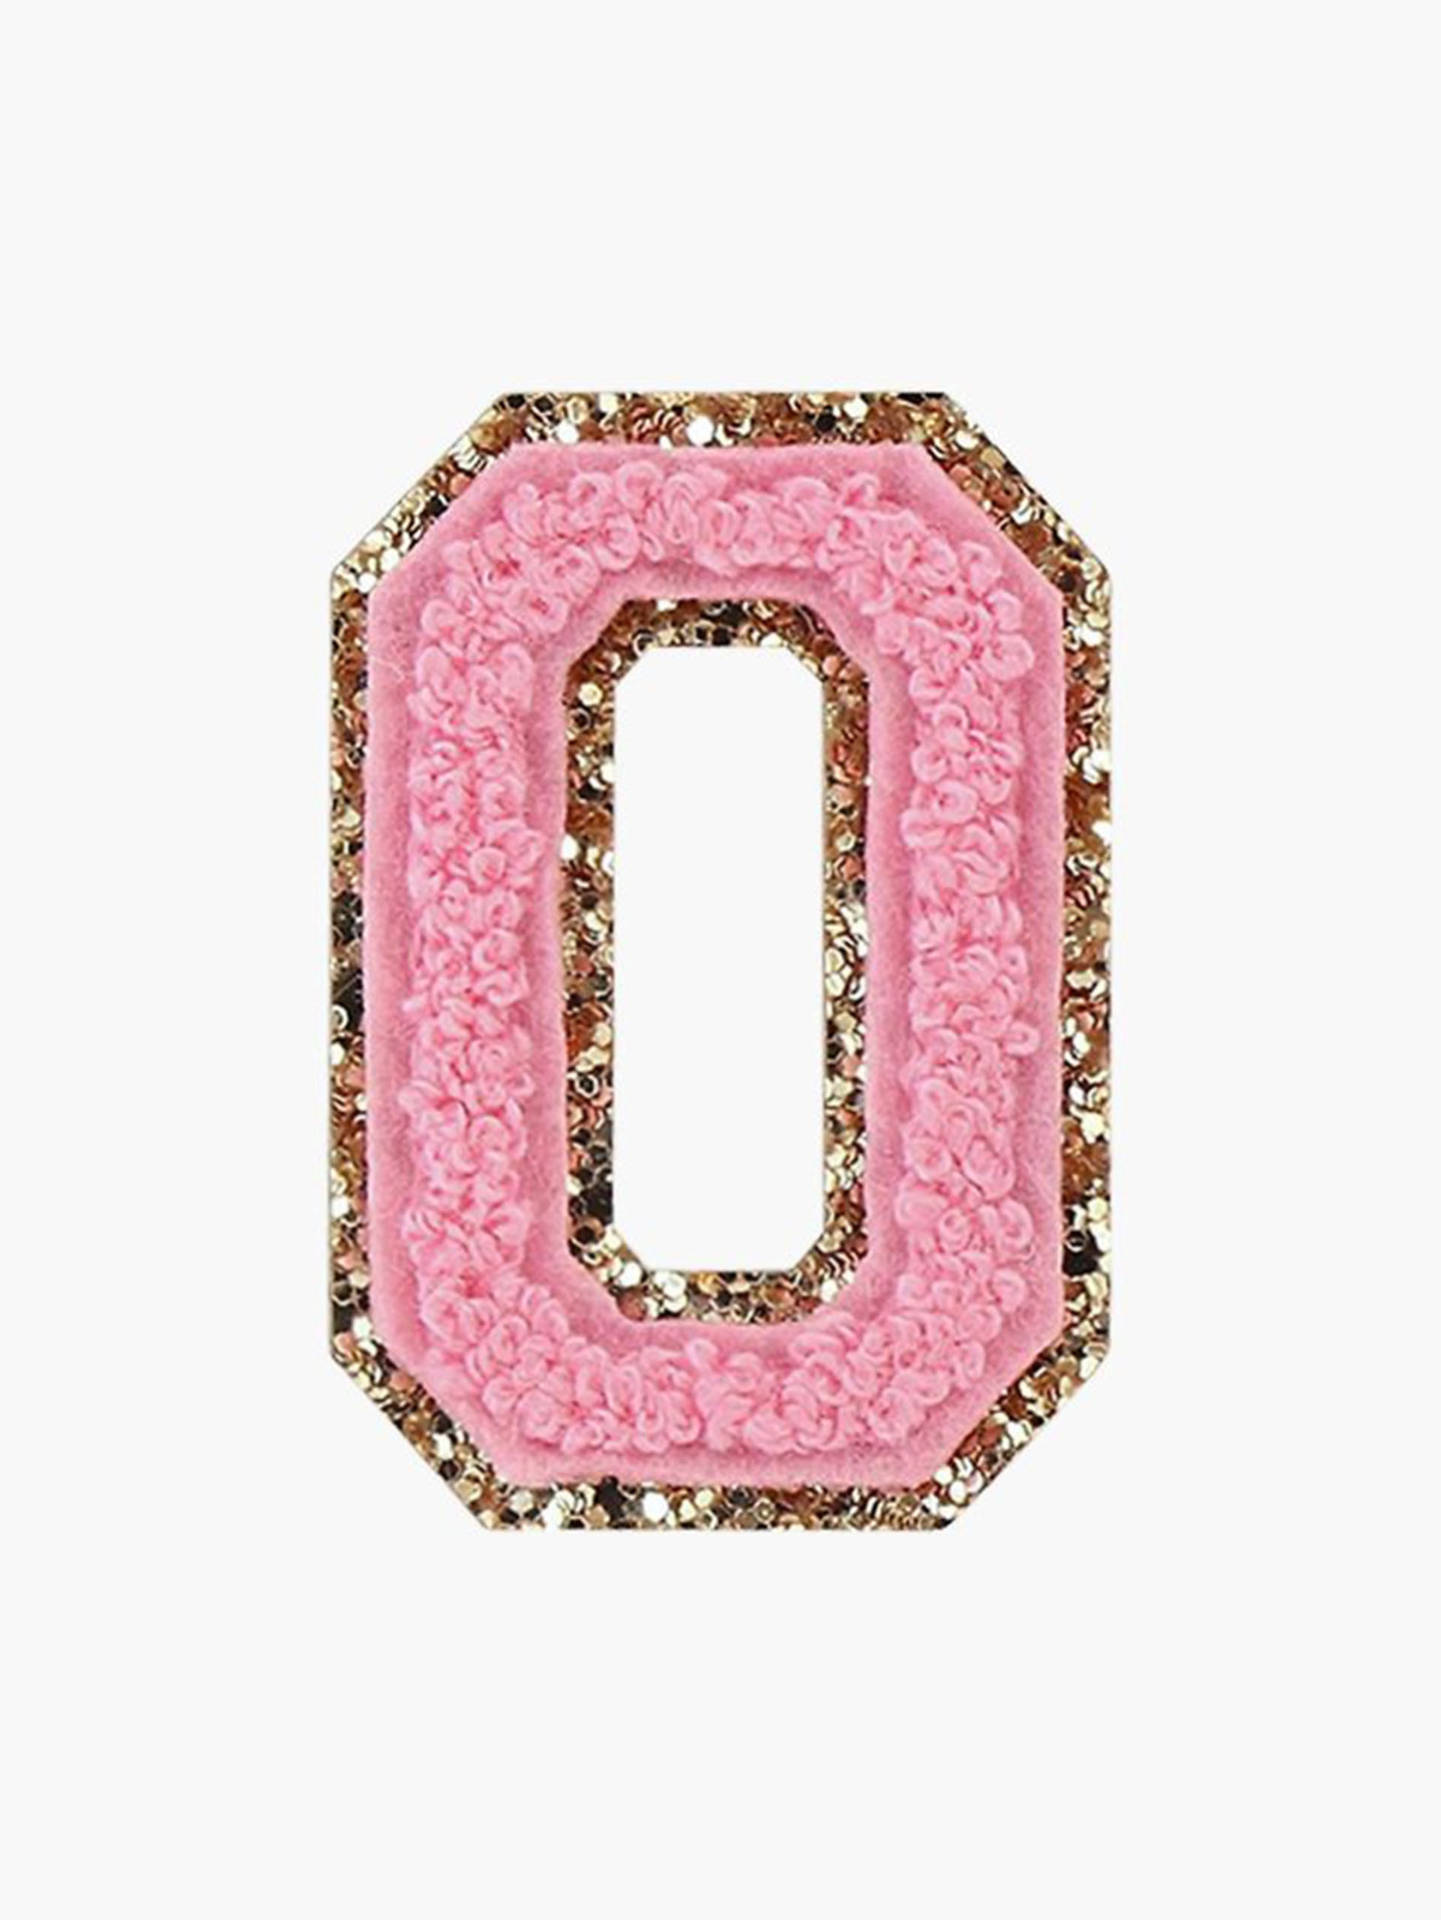 Letter O Embroidery Design